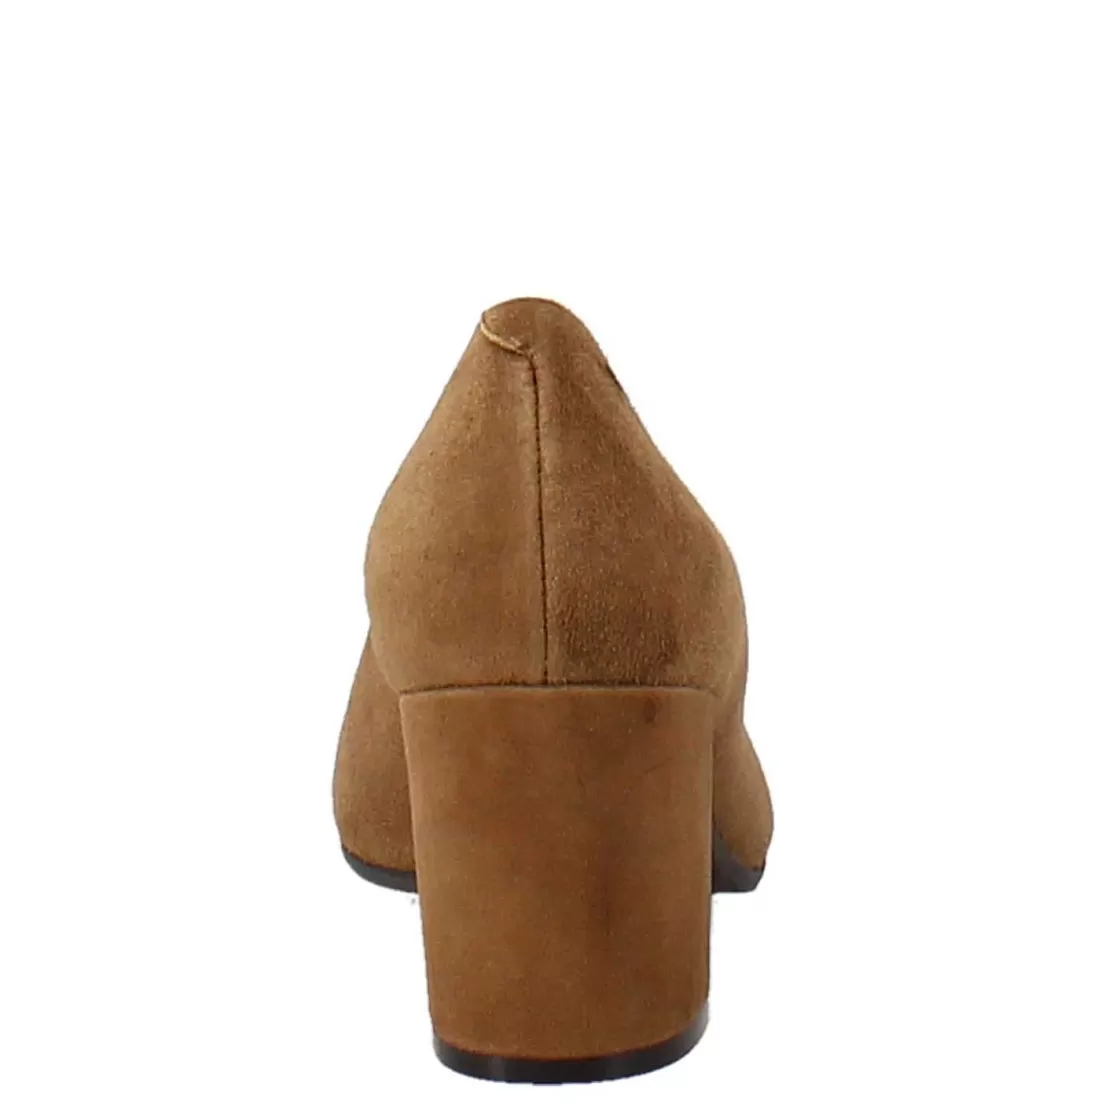 Leonardo Decollette In Brown Suede With High Heel Clearance